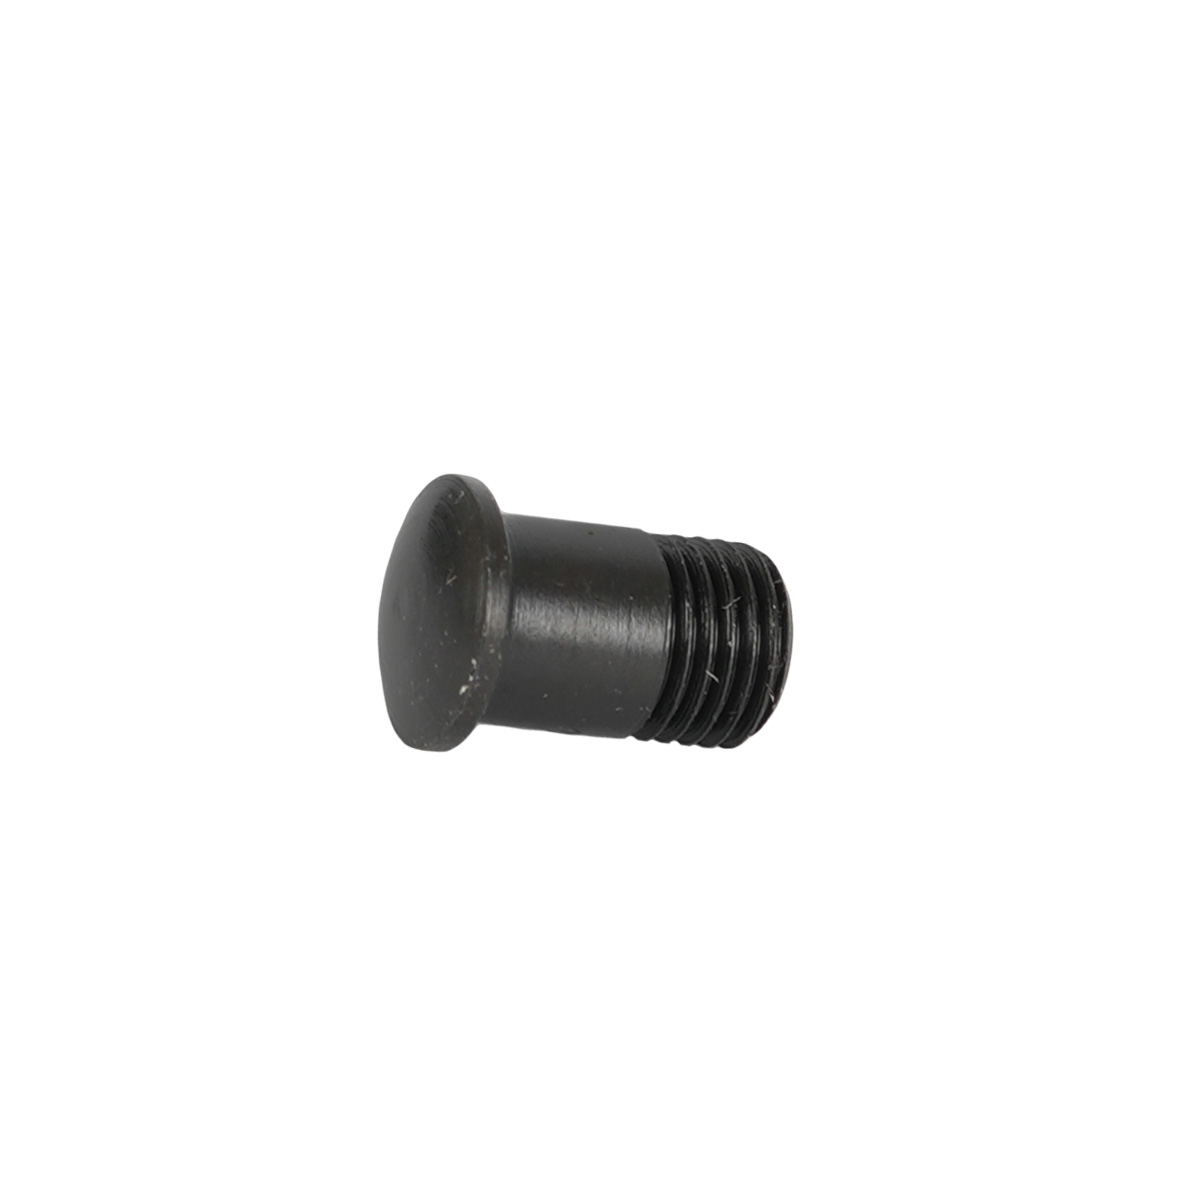 Productfoto van Campagnolo UT-WH020 Magnet-Attracting Nipple Insert for Eurus / Shamal / Ultra